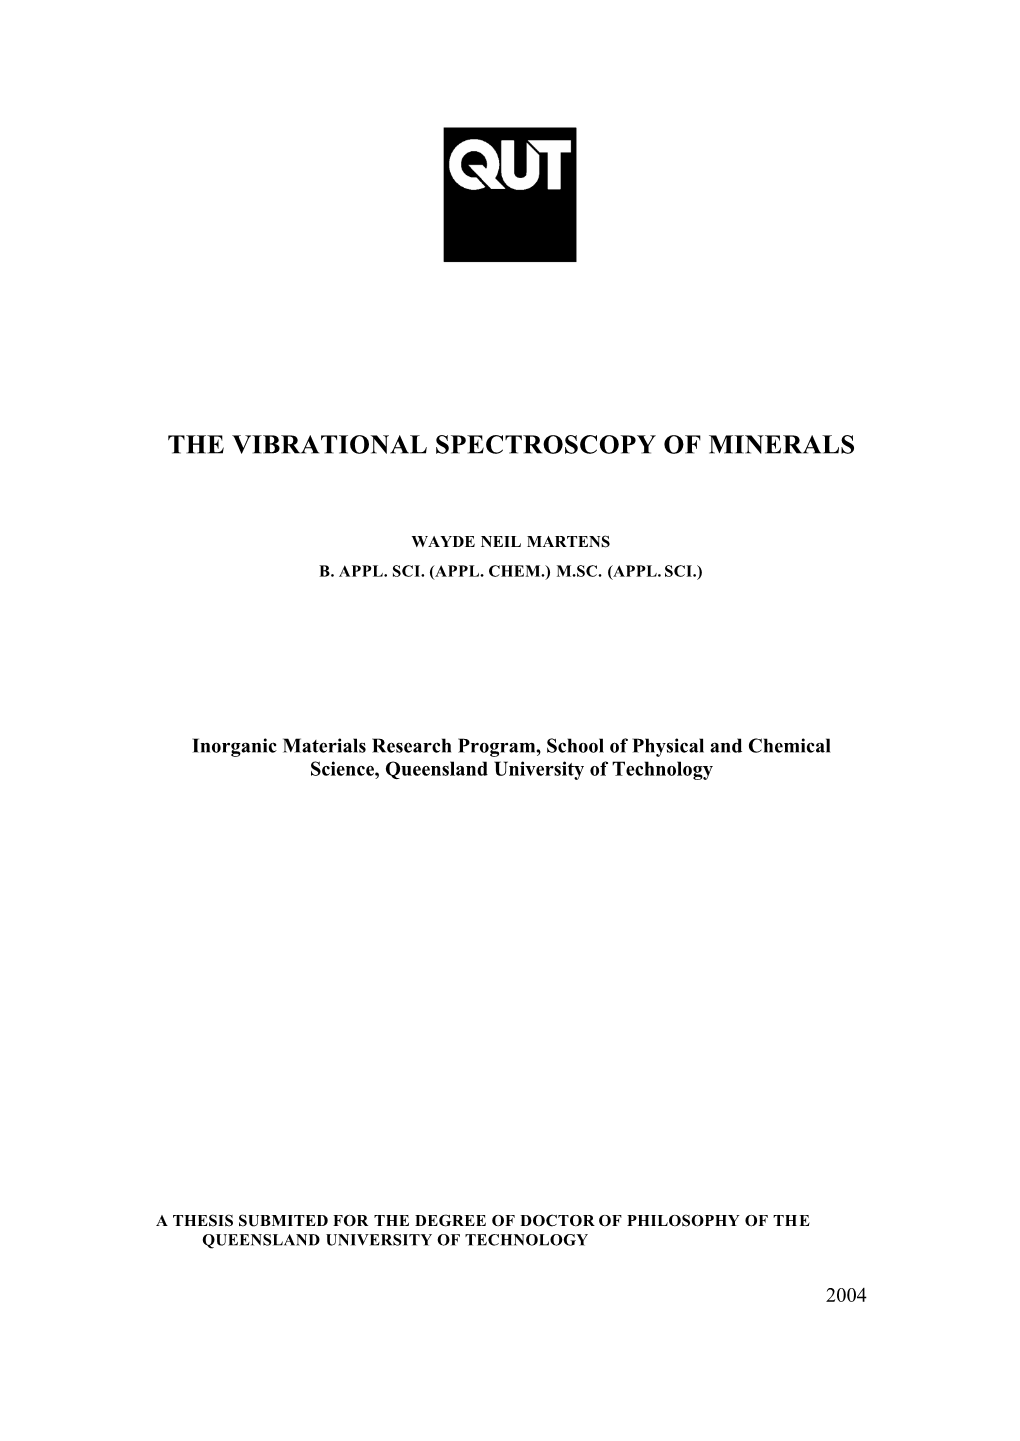 The Vibrational Spectroscopy of Minerals